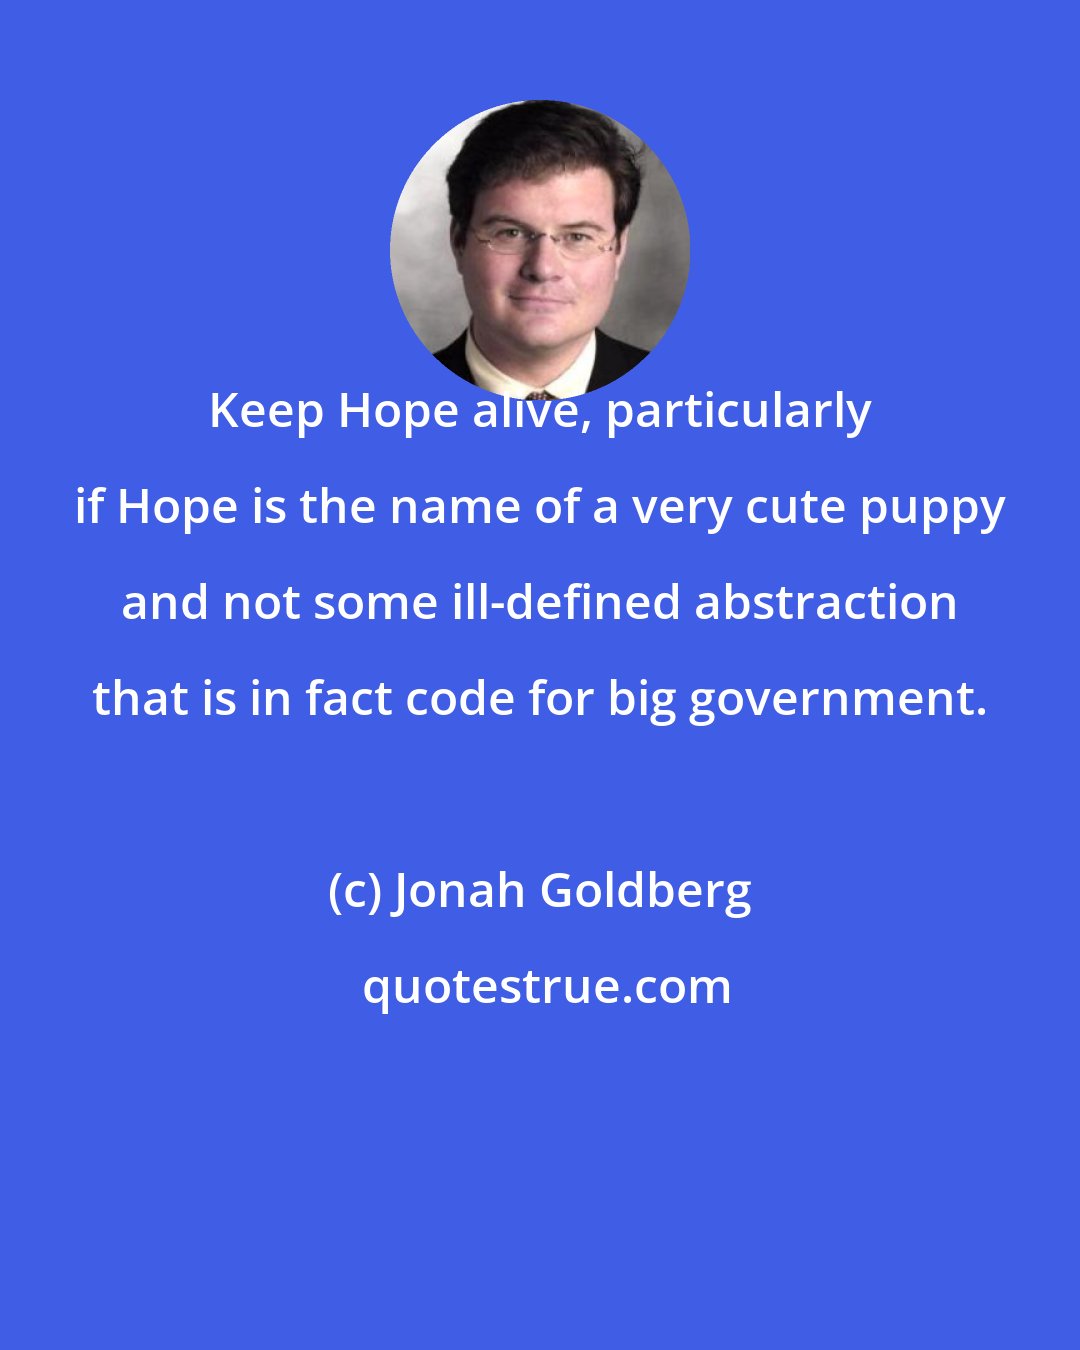 Jonah Goldberg: Keep Hope alive, particularly if Hope is the name of a very cute puppy and not some ill-defined abstraction that is in fact code for big government.